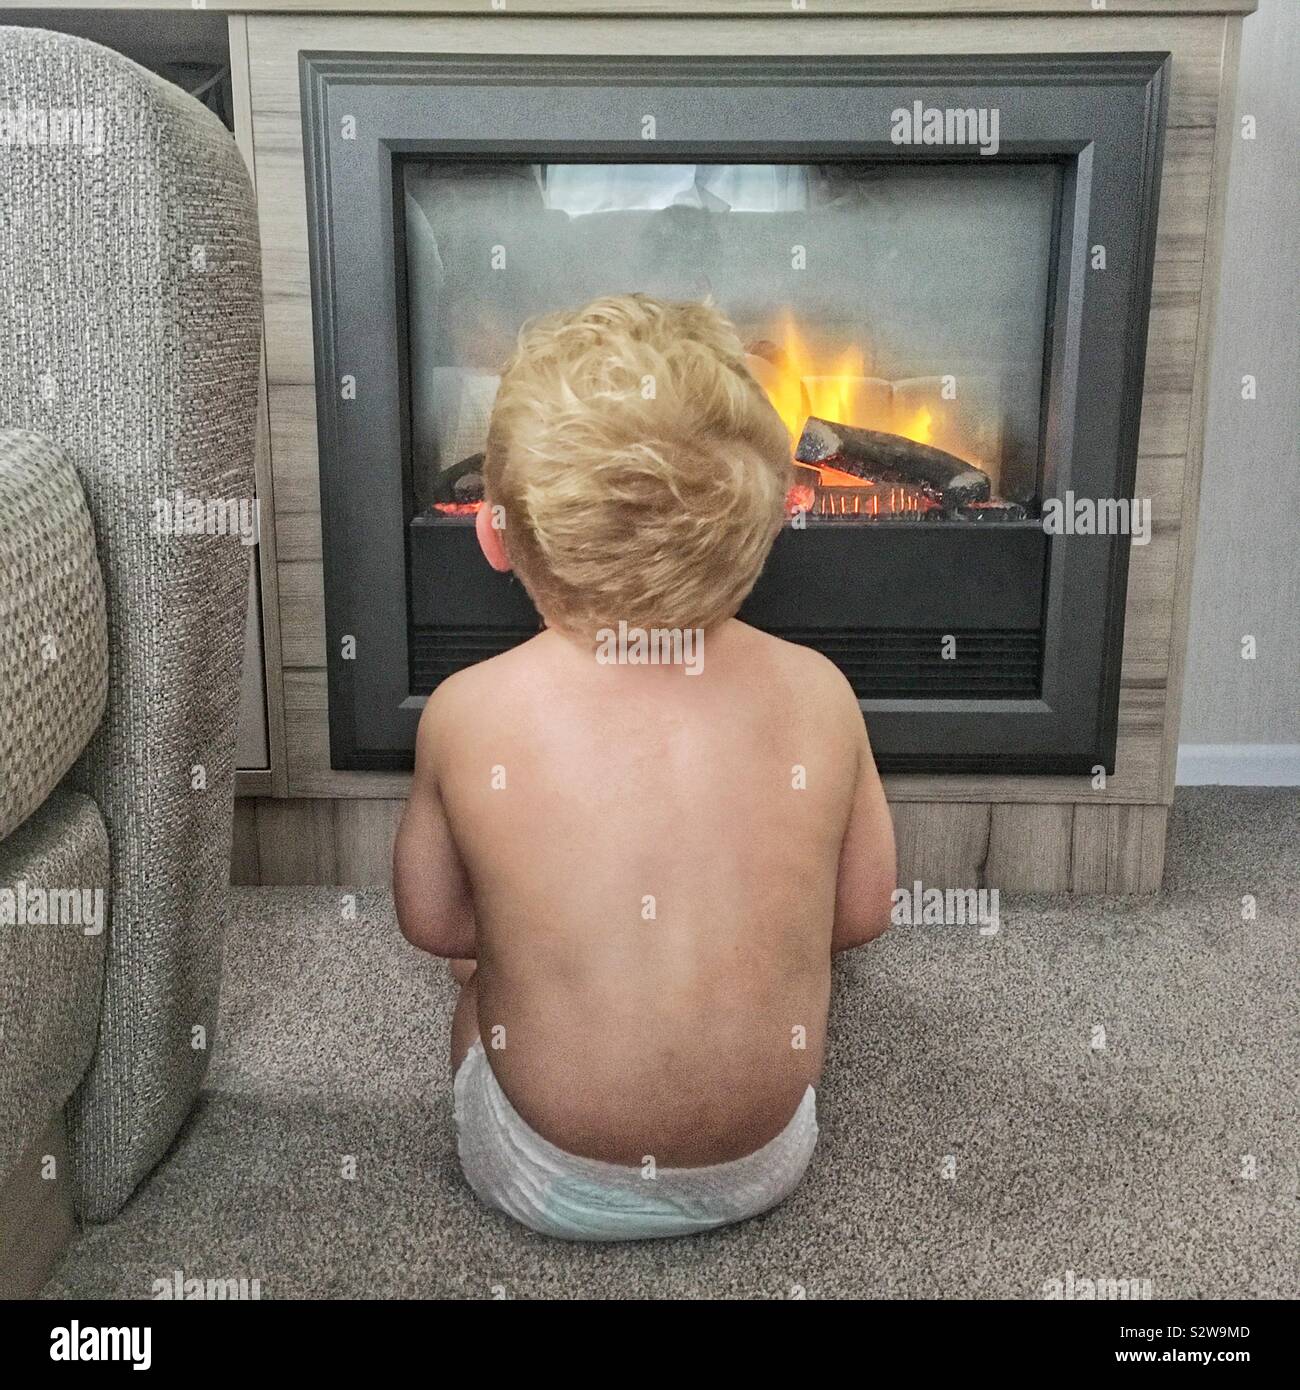 Two year old boy warming himself in front of a electric fire. Stock Photo